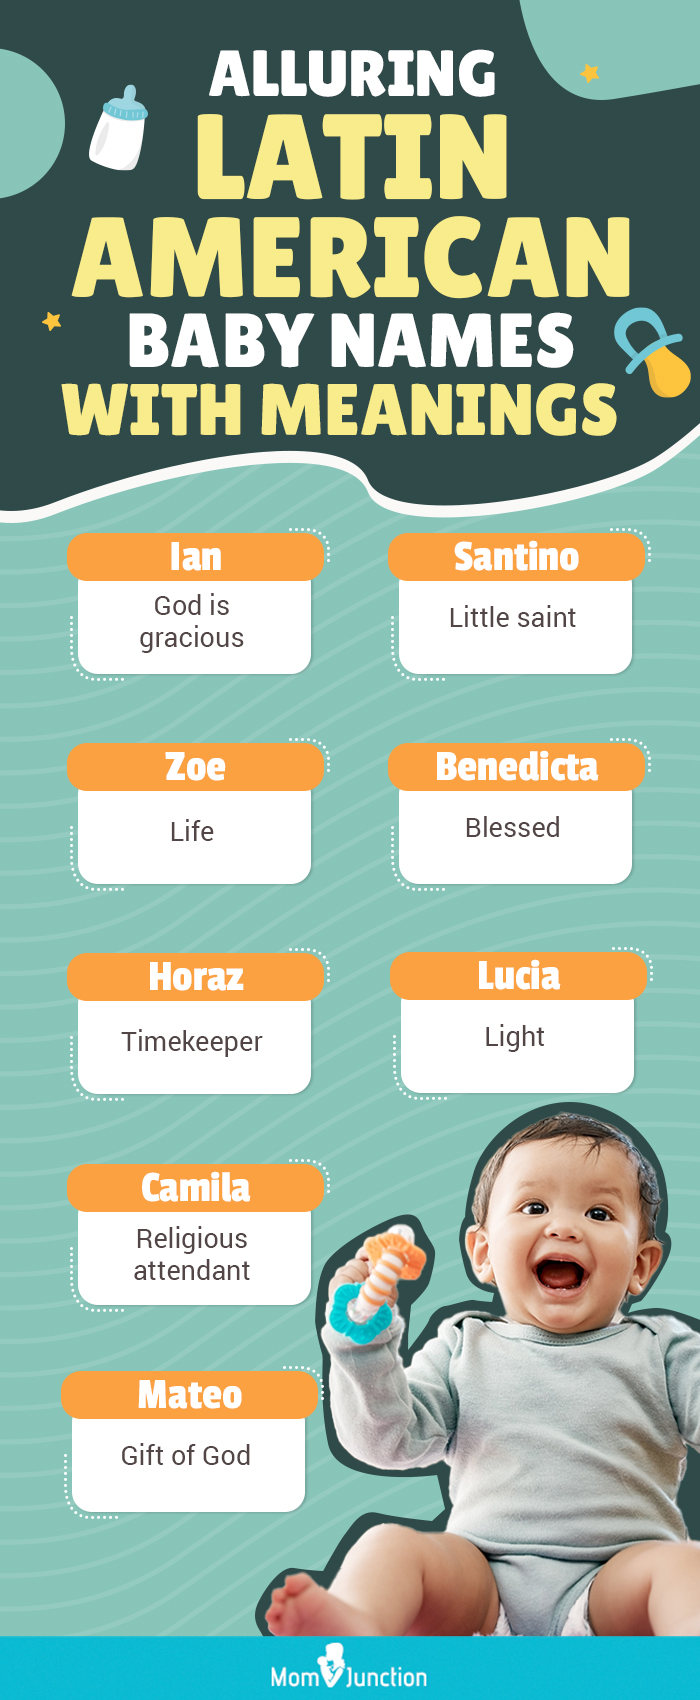 alluring latin american baby names with meanings (infographic)